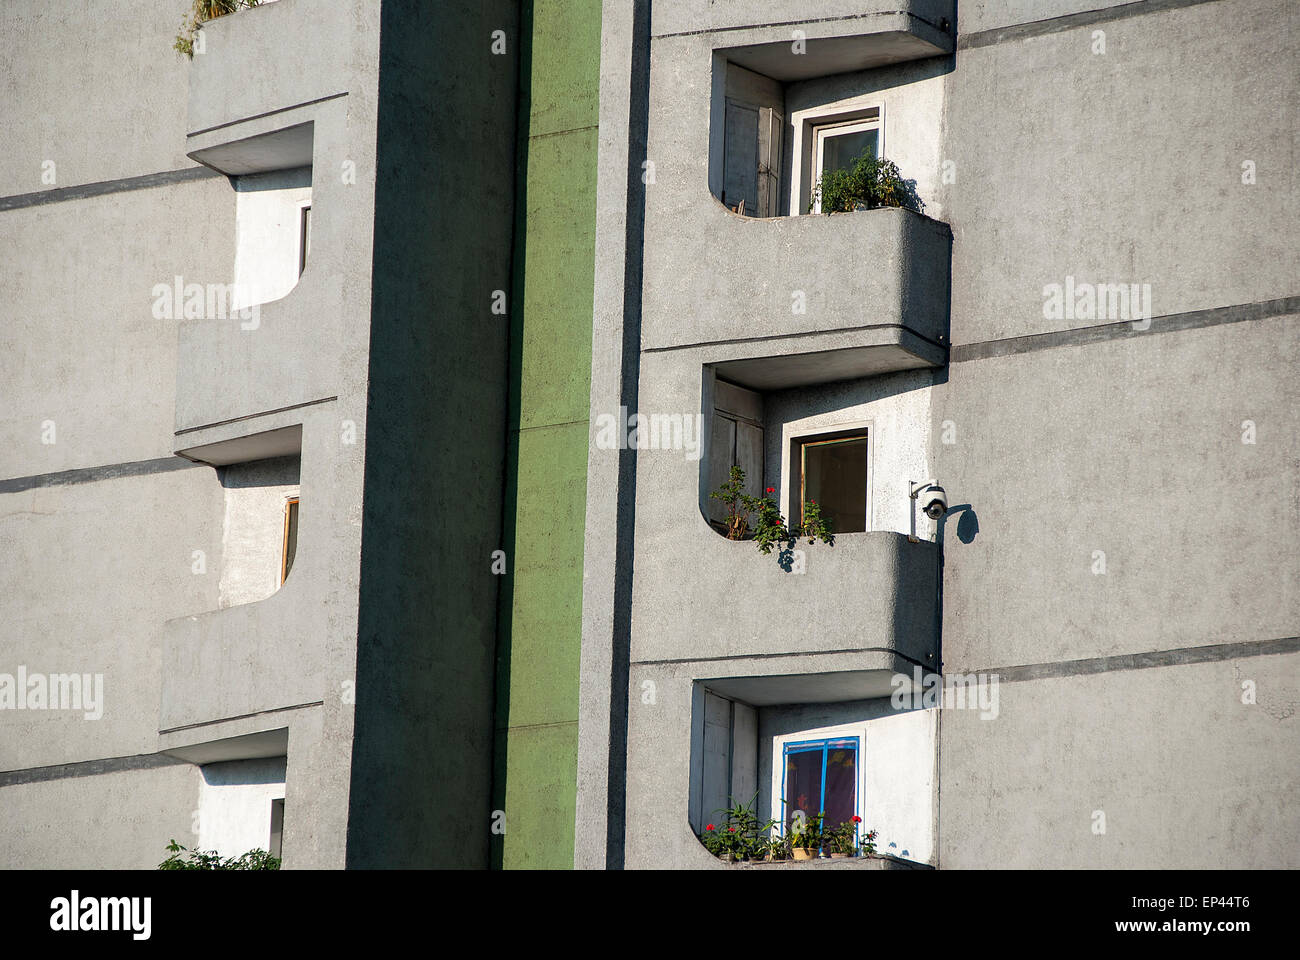 Residential building with camera surveillance in Pyongyang, North Korea, DPRK Stock Photo